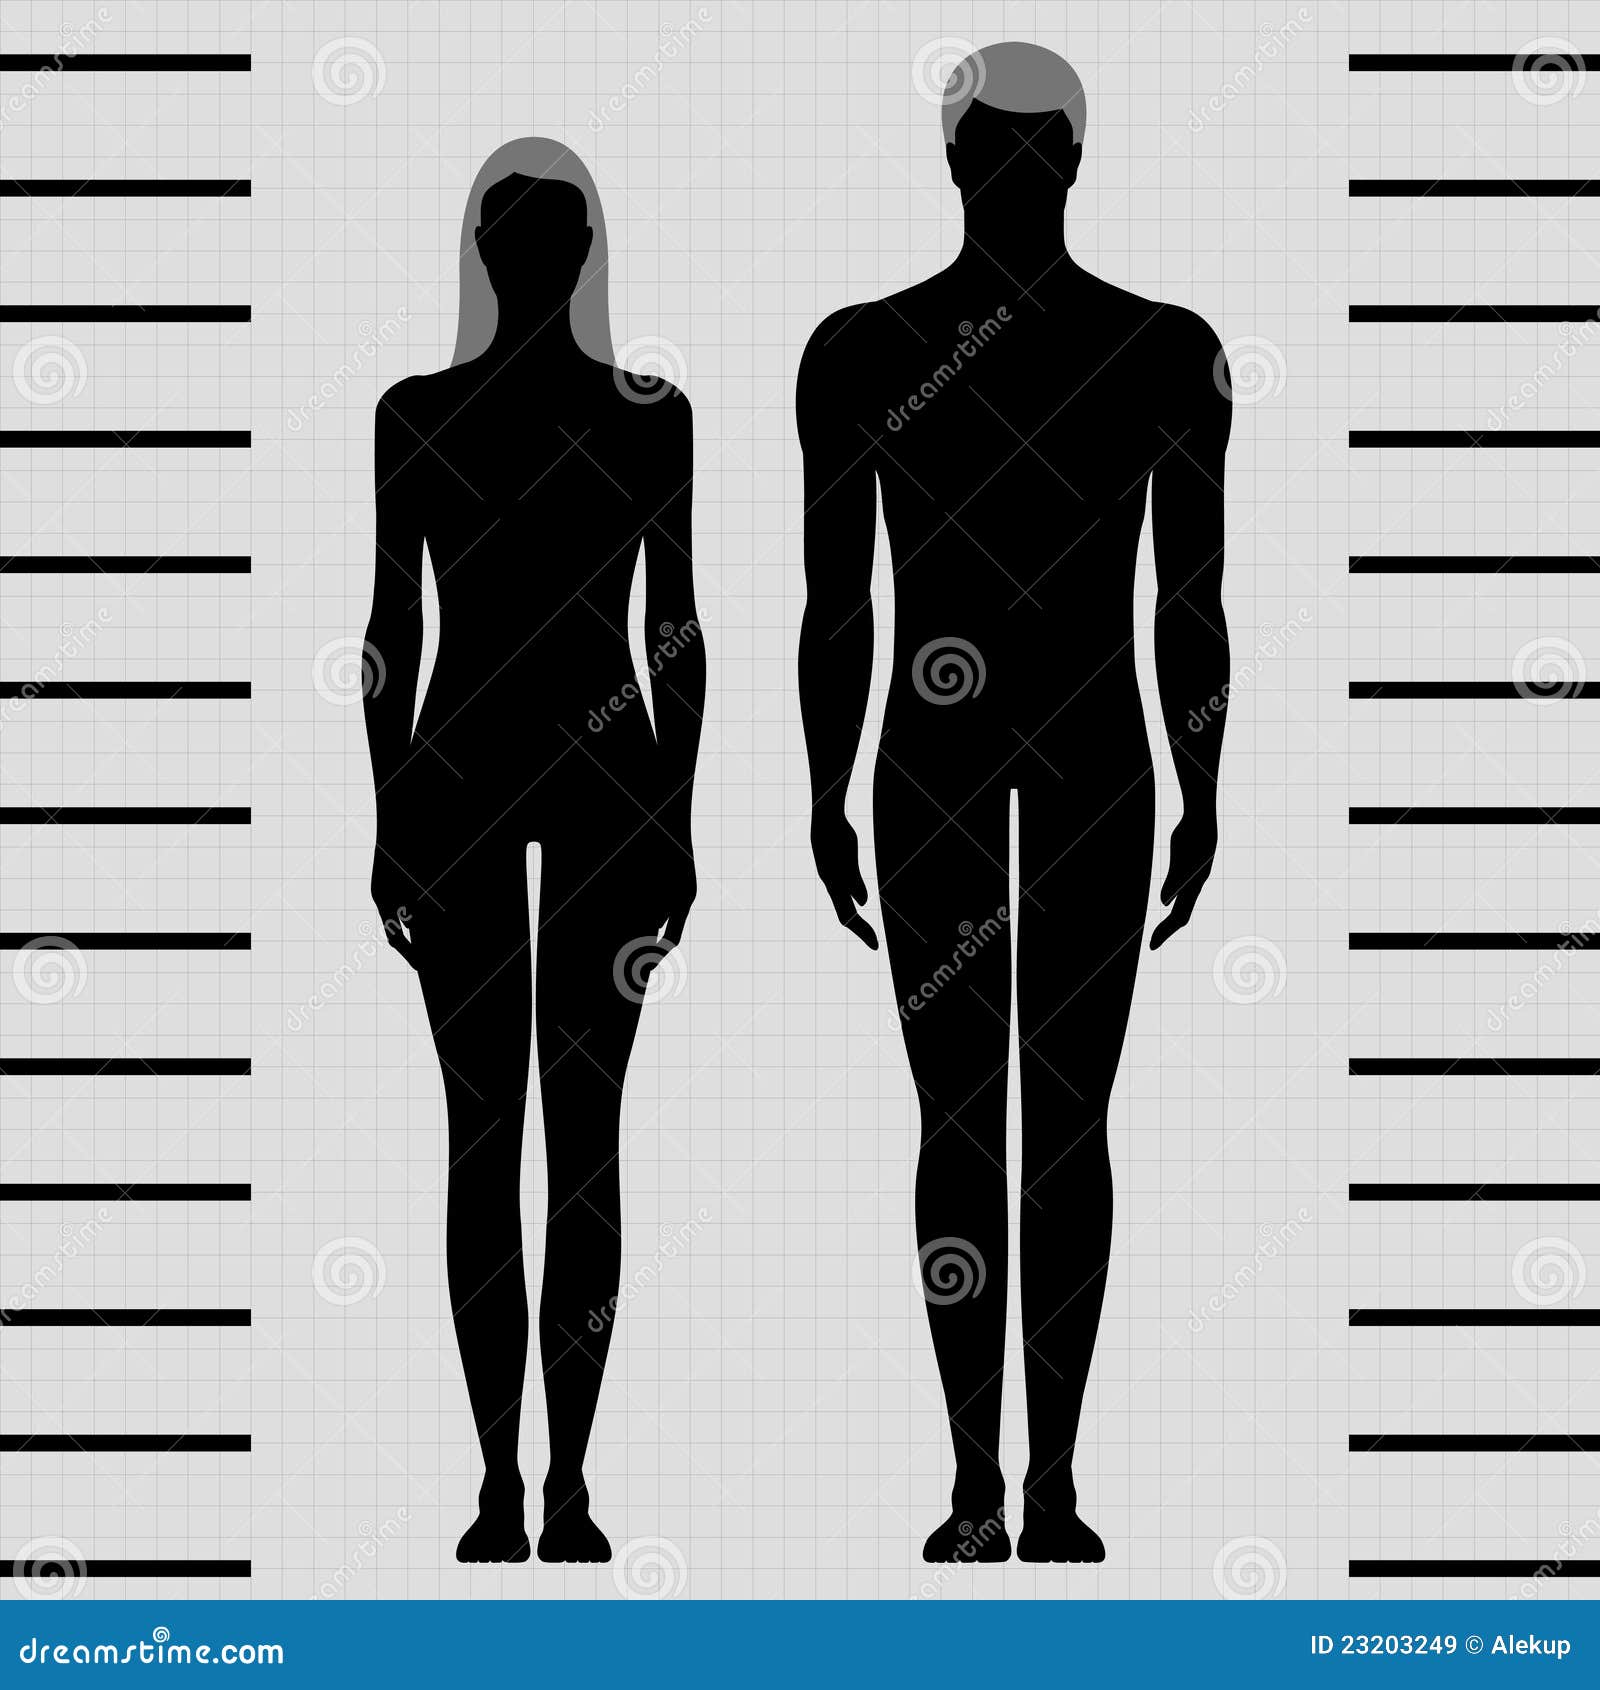 Male And Female Body Templates Stock Vector Illustration